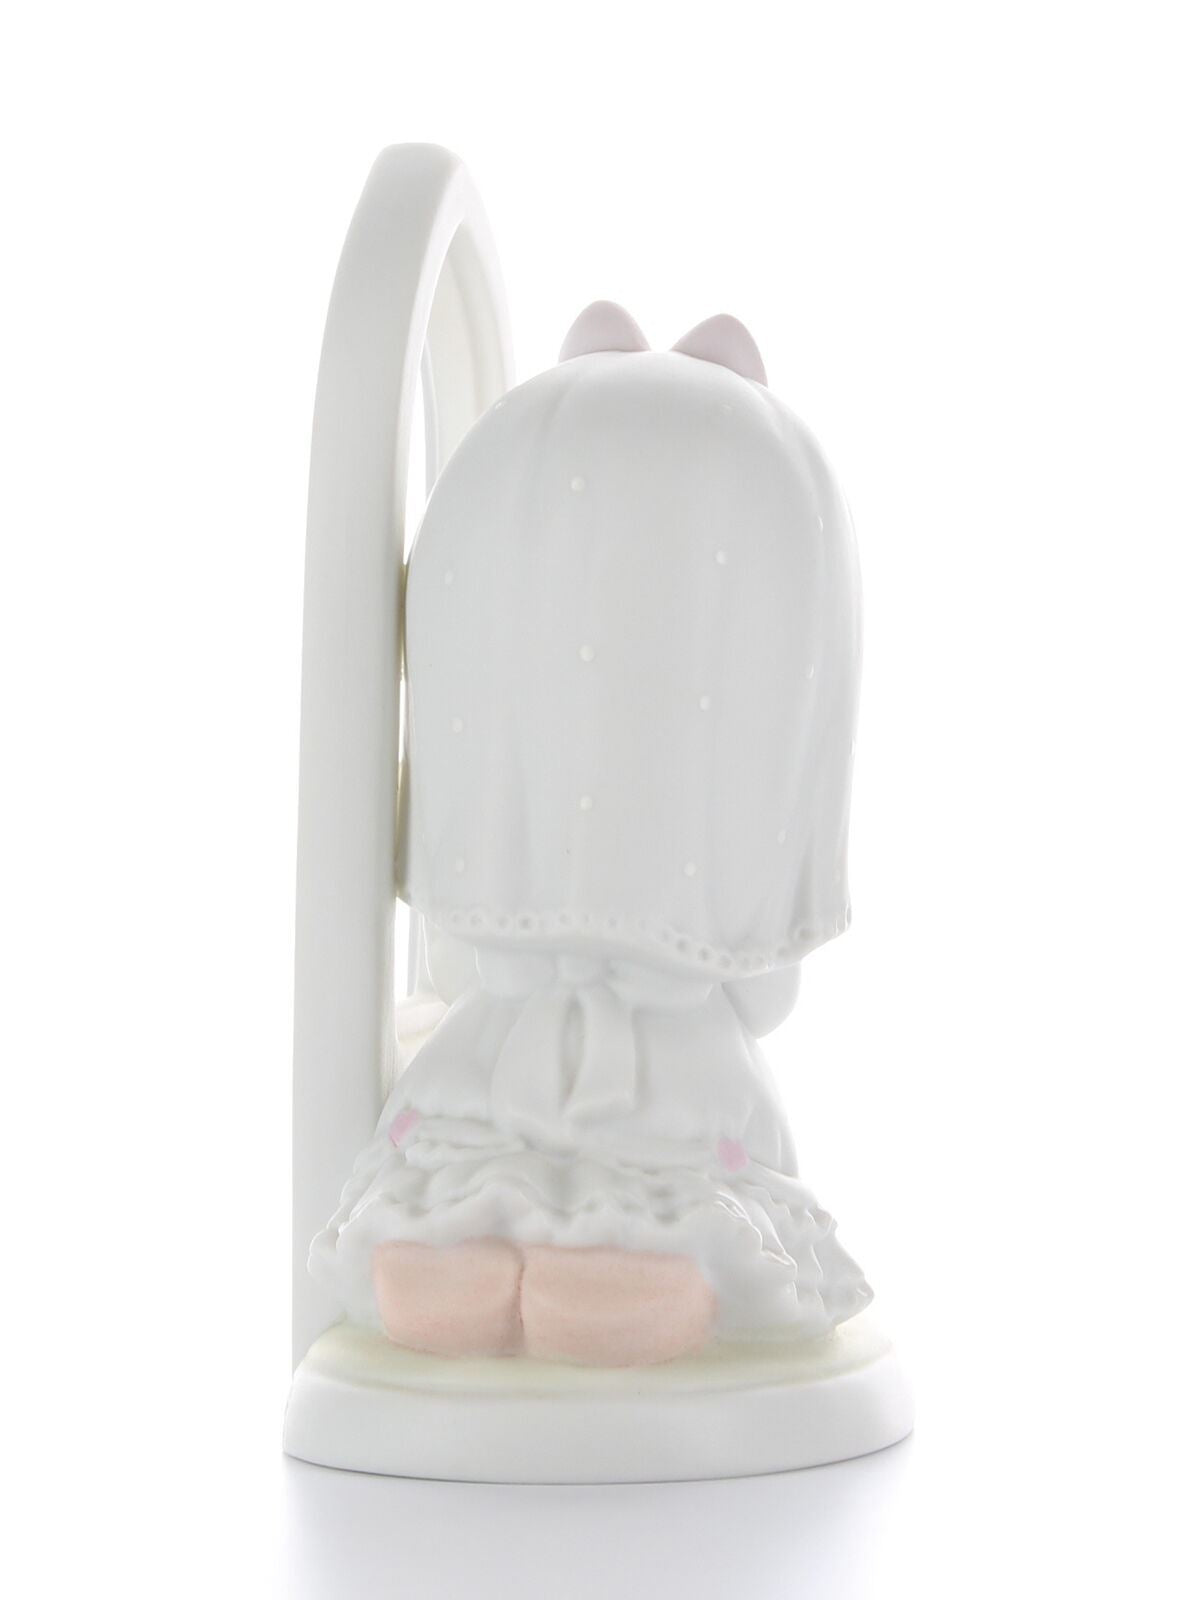 Precious Moments Enesco Porcelain Wedding Figurine May Your Future Be Blessed